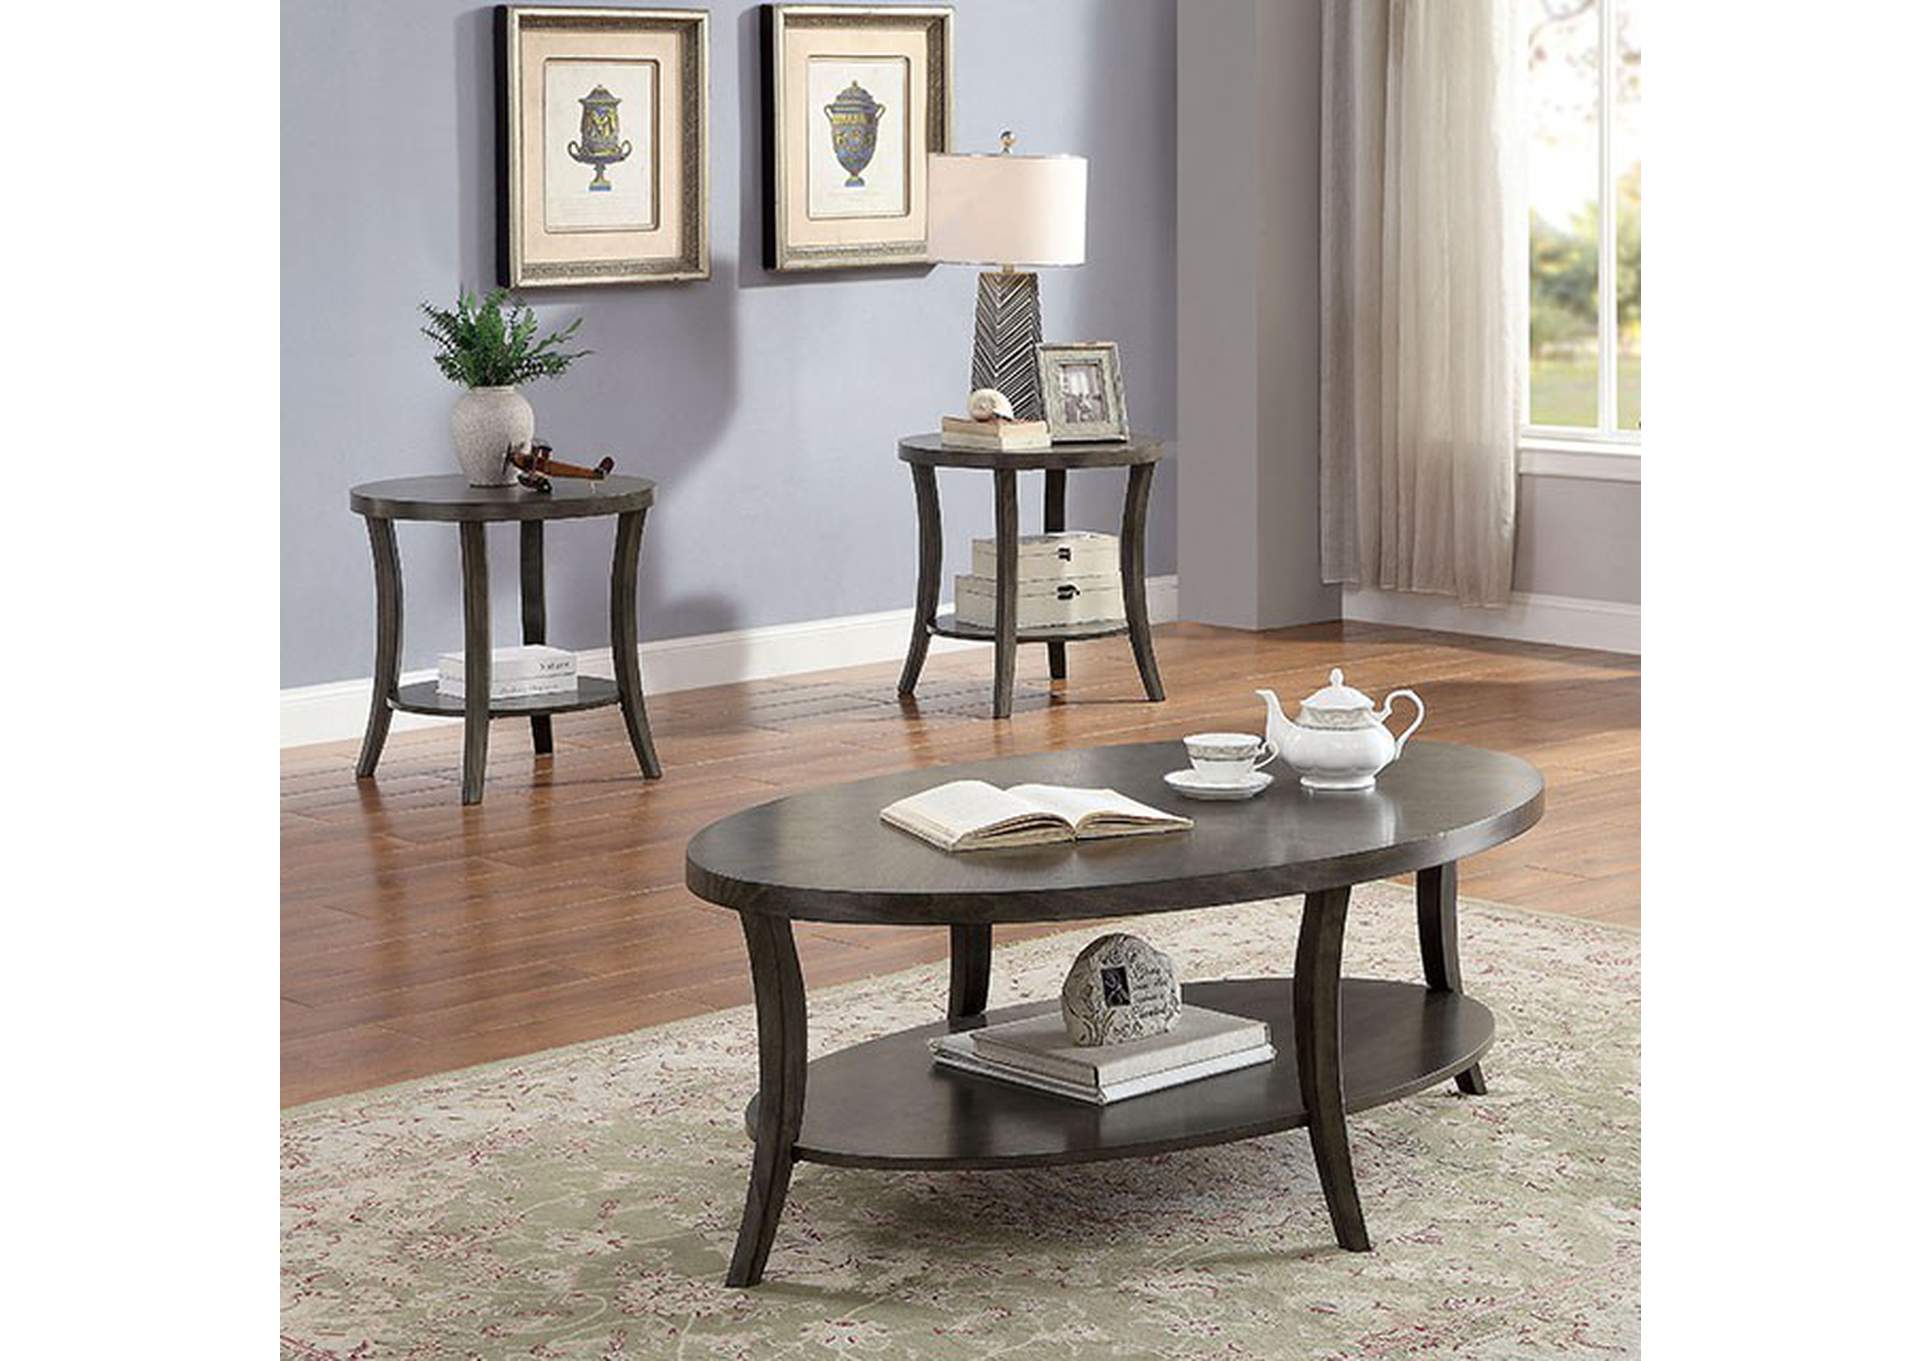 Paola Gray 3 Piece Table Set,Furniture of America